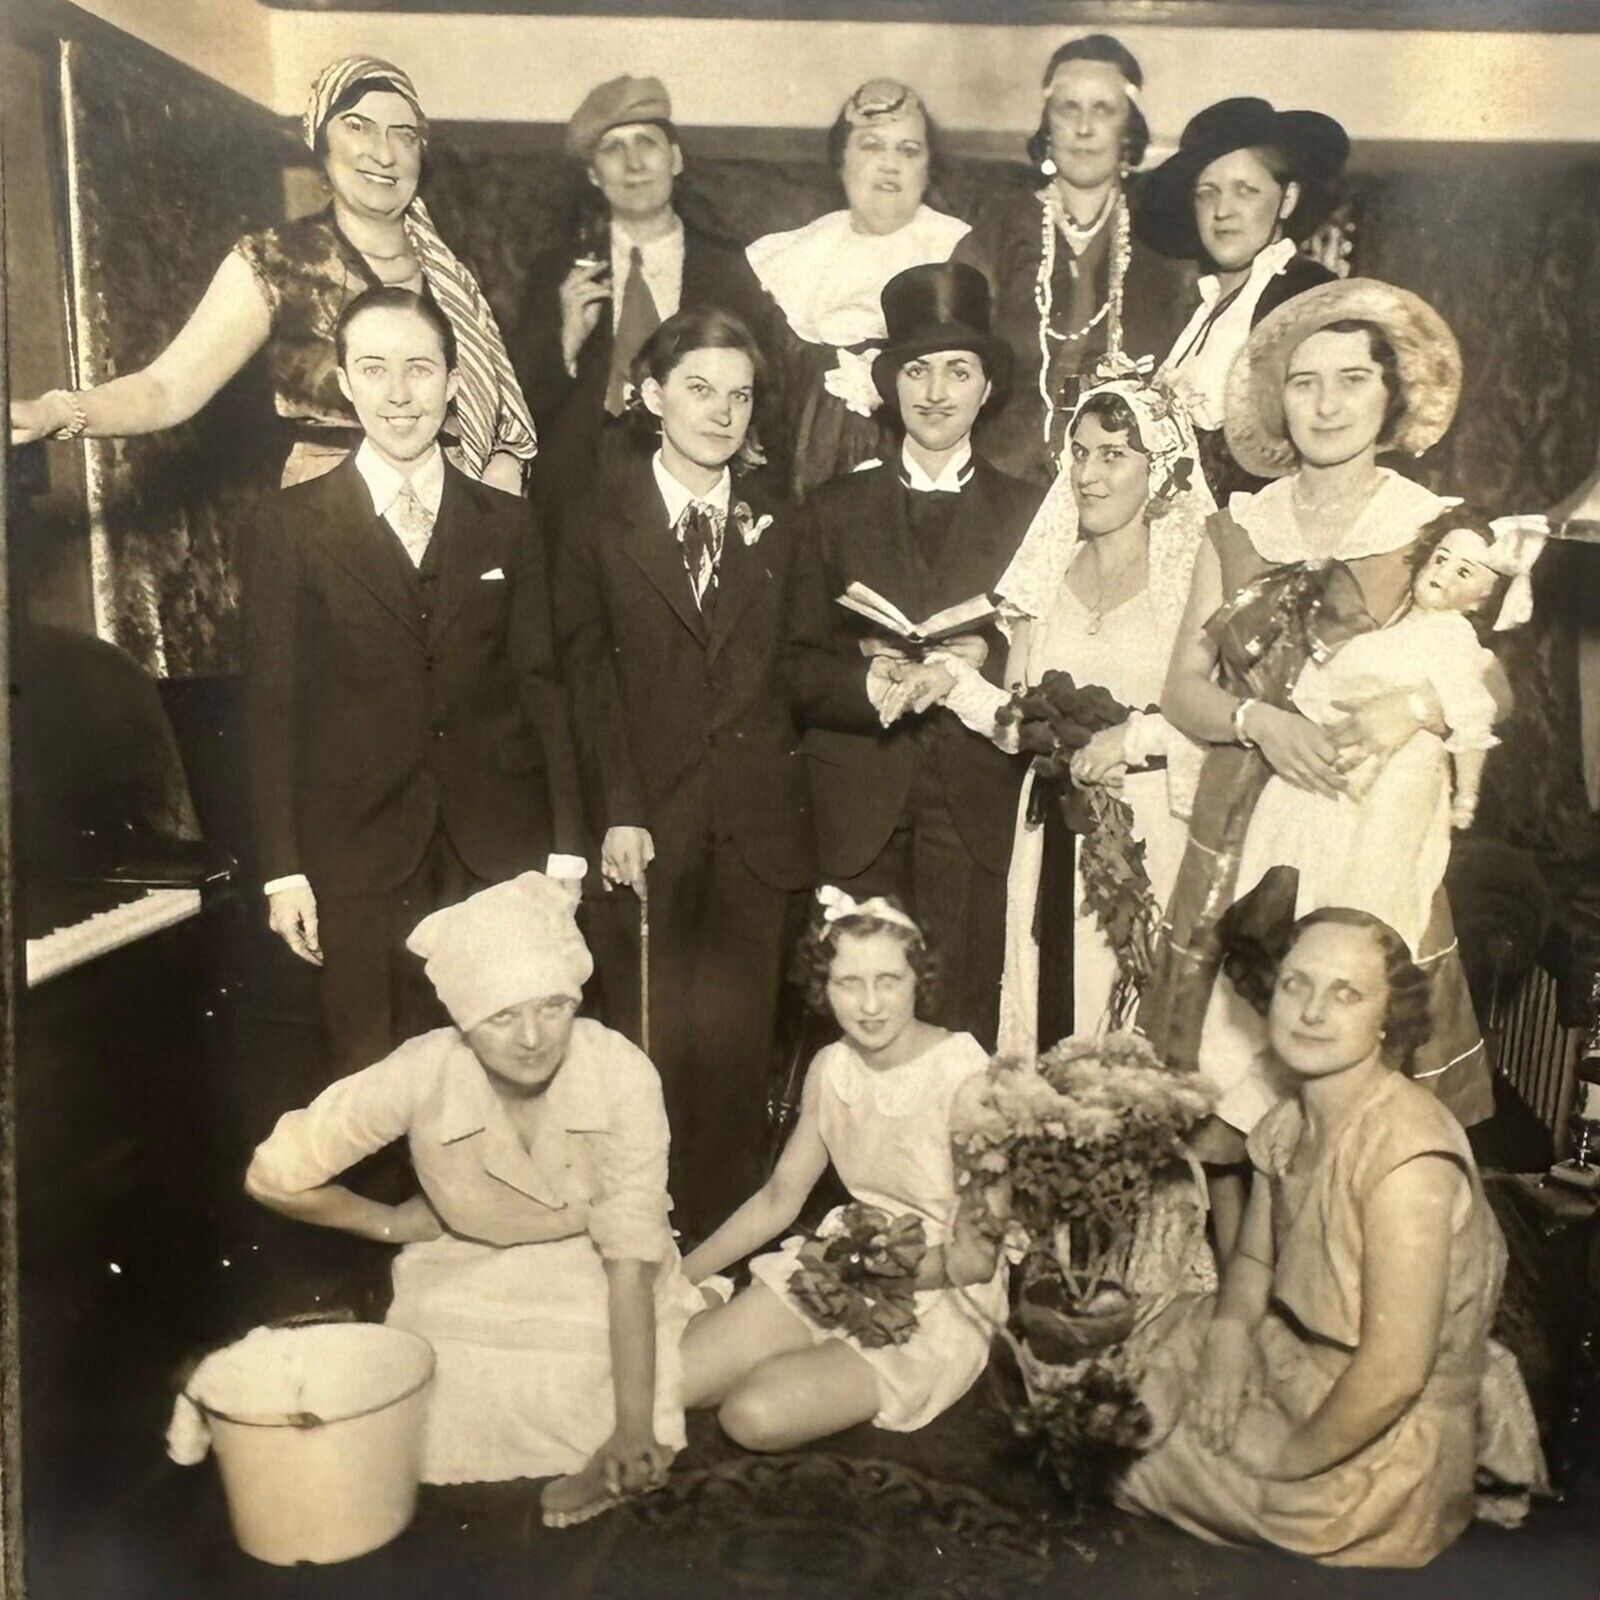 Antique 8x10” Photo Cross Dressing Women As Men Wedding Stag Party Chicago LGBTQ